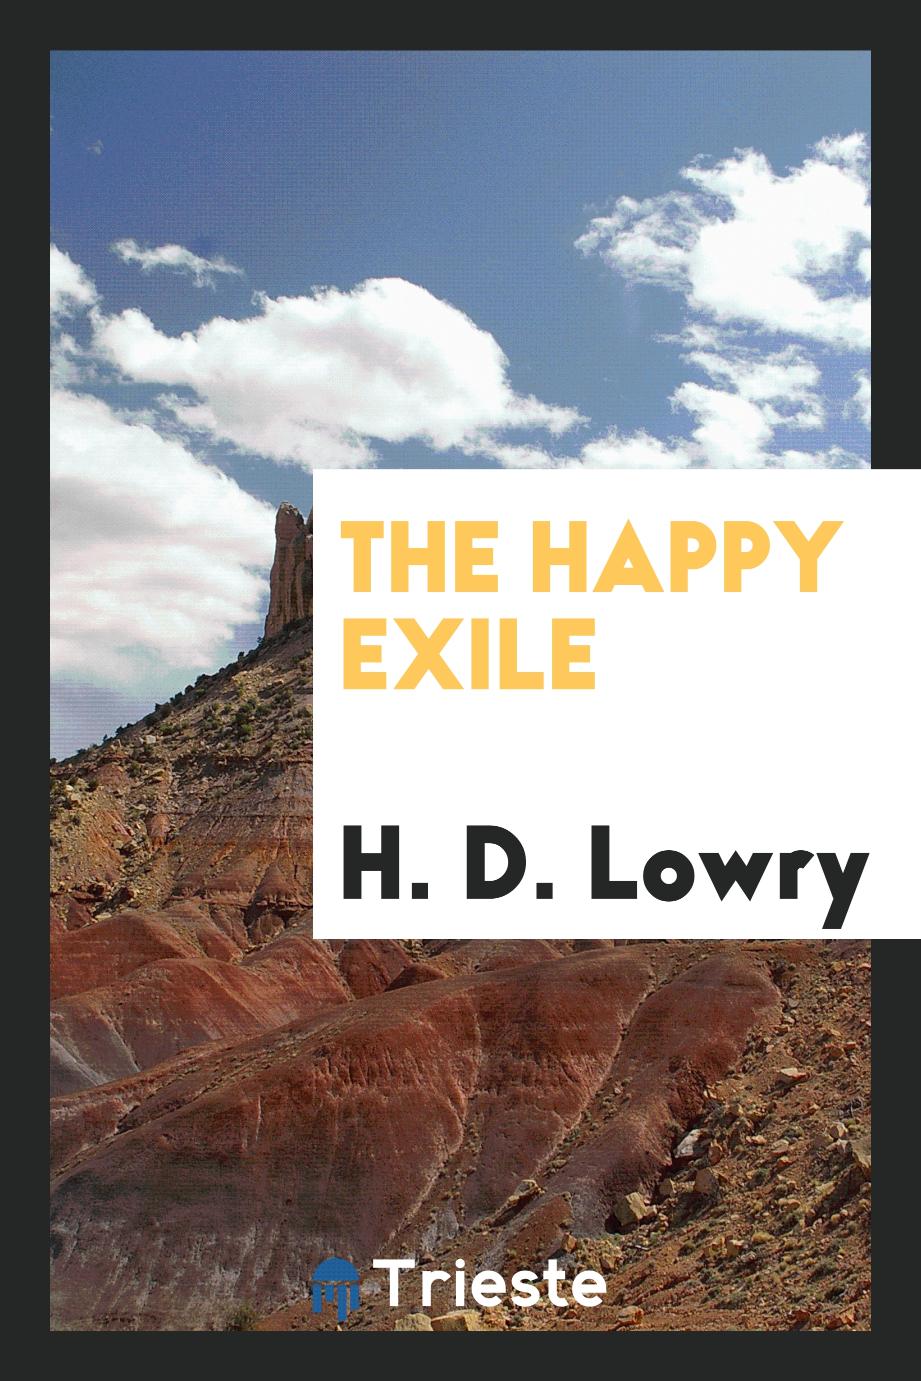 The happy exile